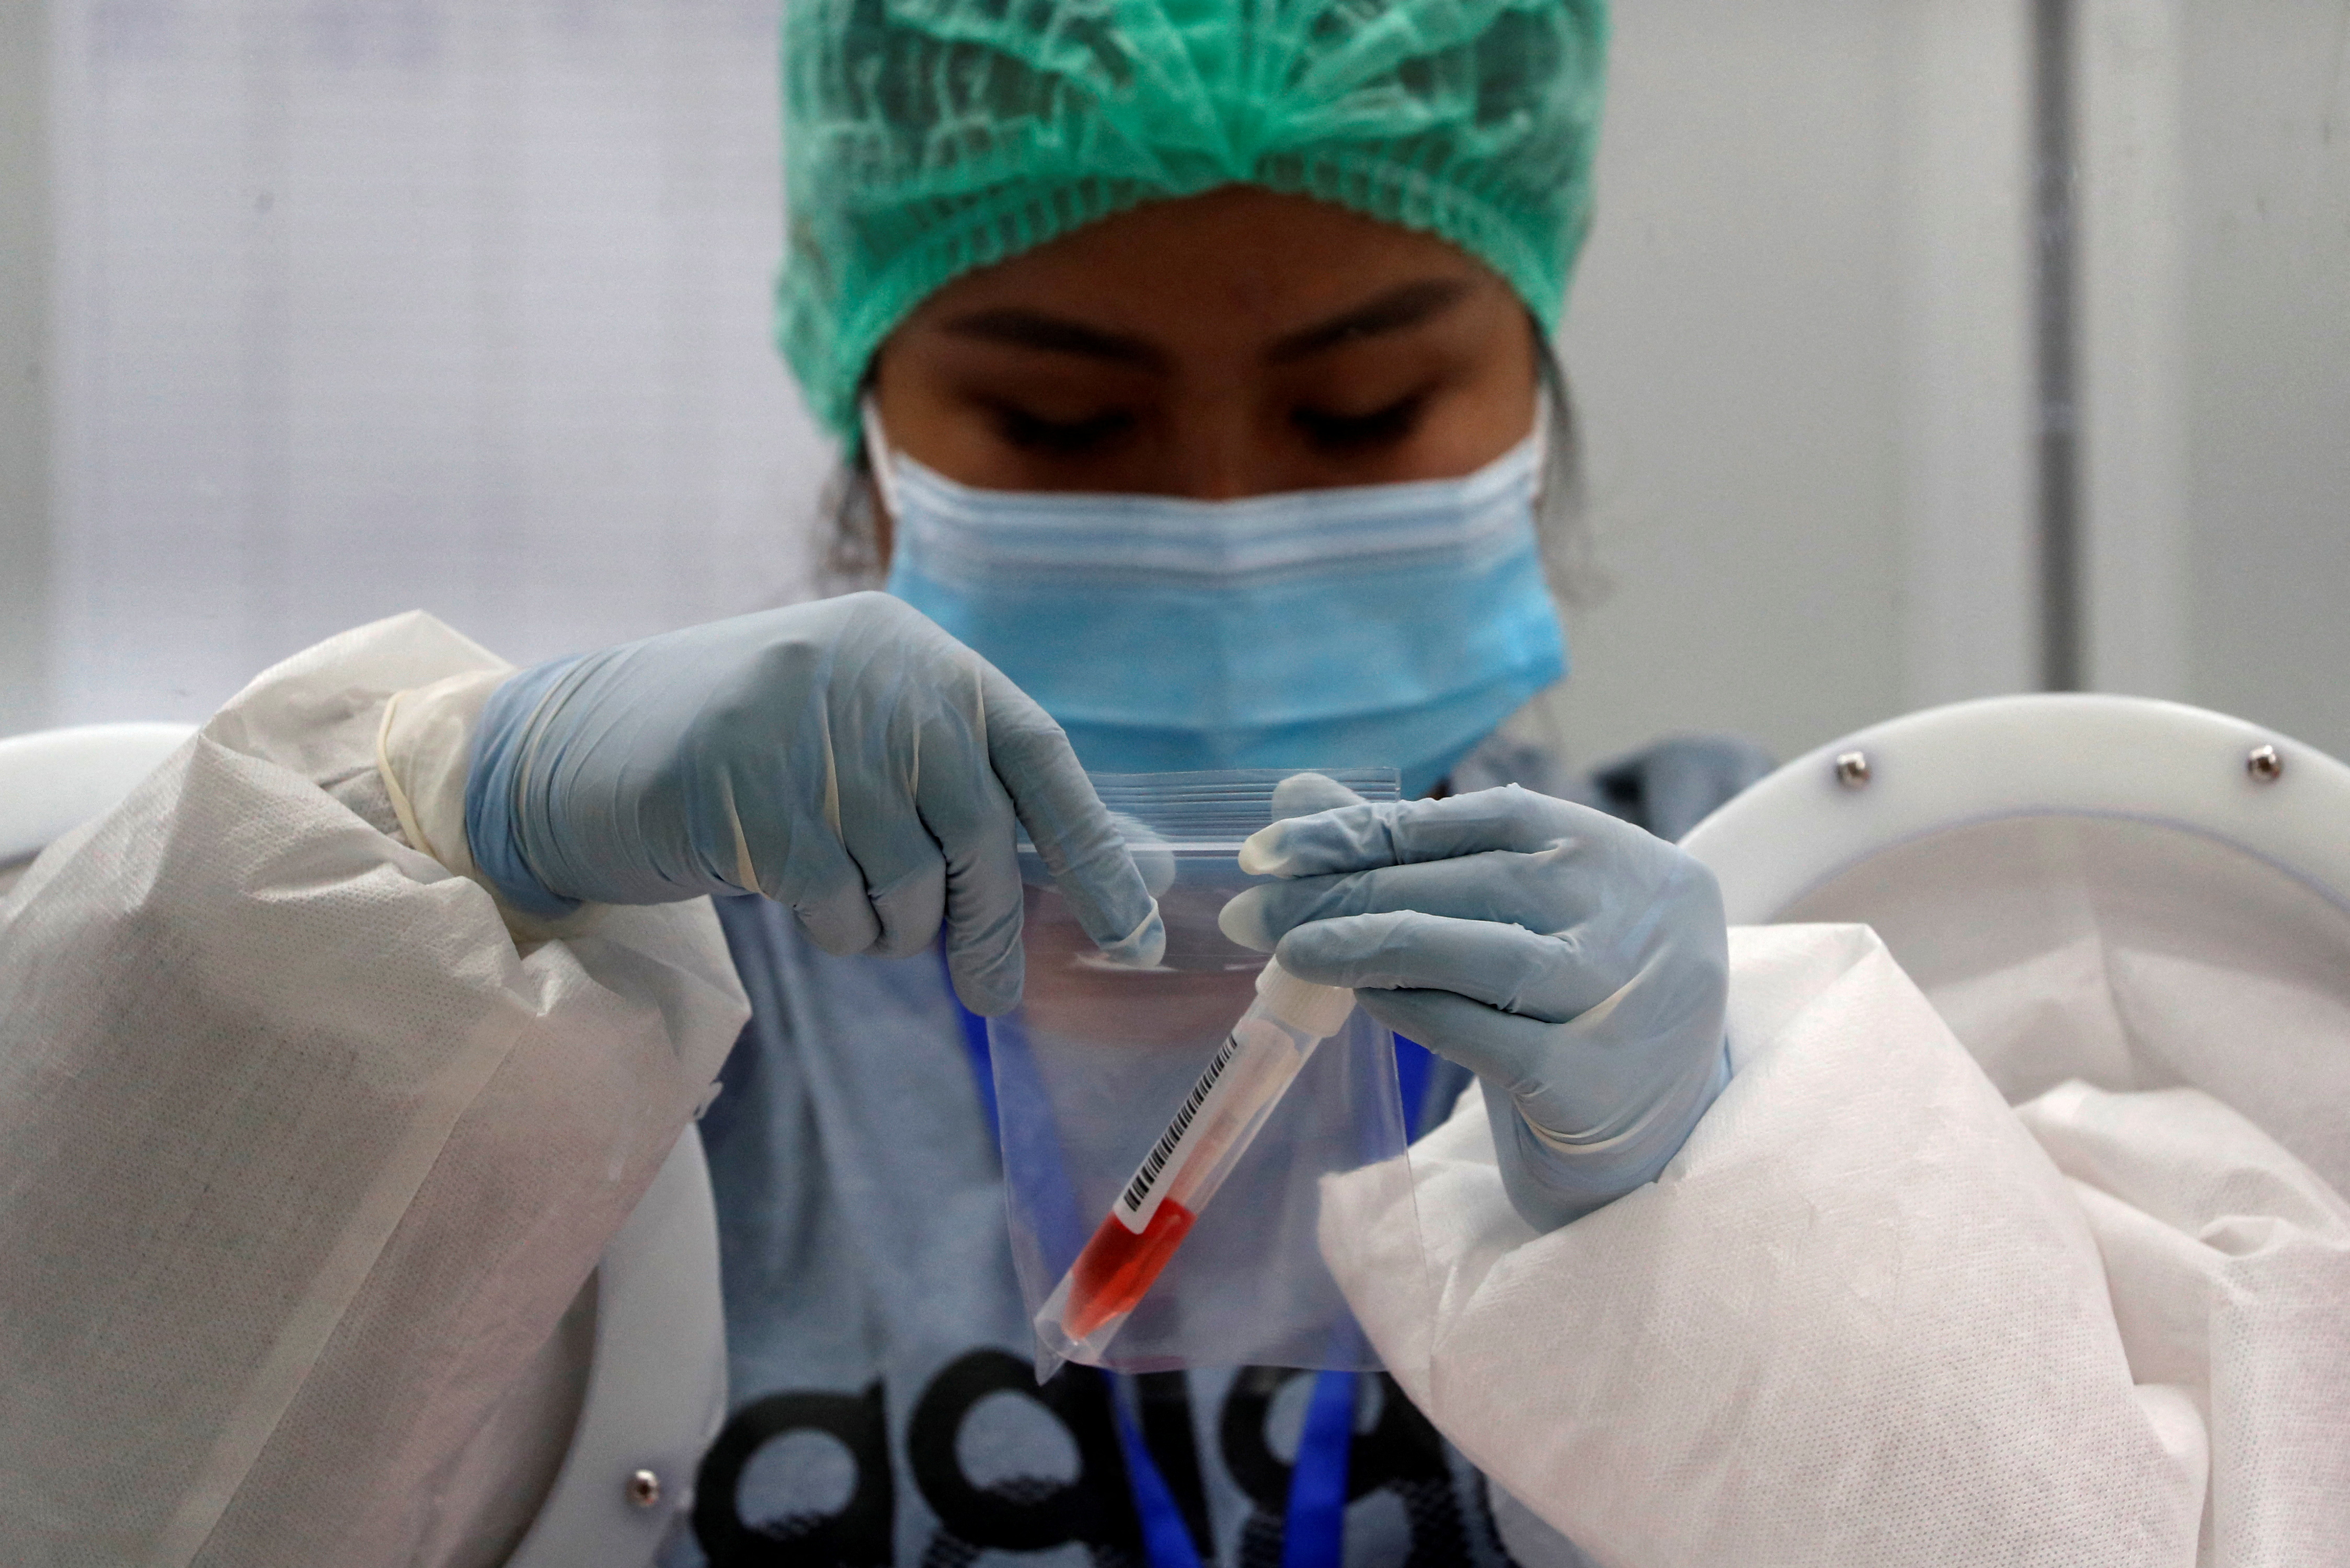 A nurse closes a bag that contains a sample collected from a passenger as it's mandatory to check all arriving passengers to prevent the spread of the coronavirus disease, at the international airport in Phuket